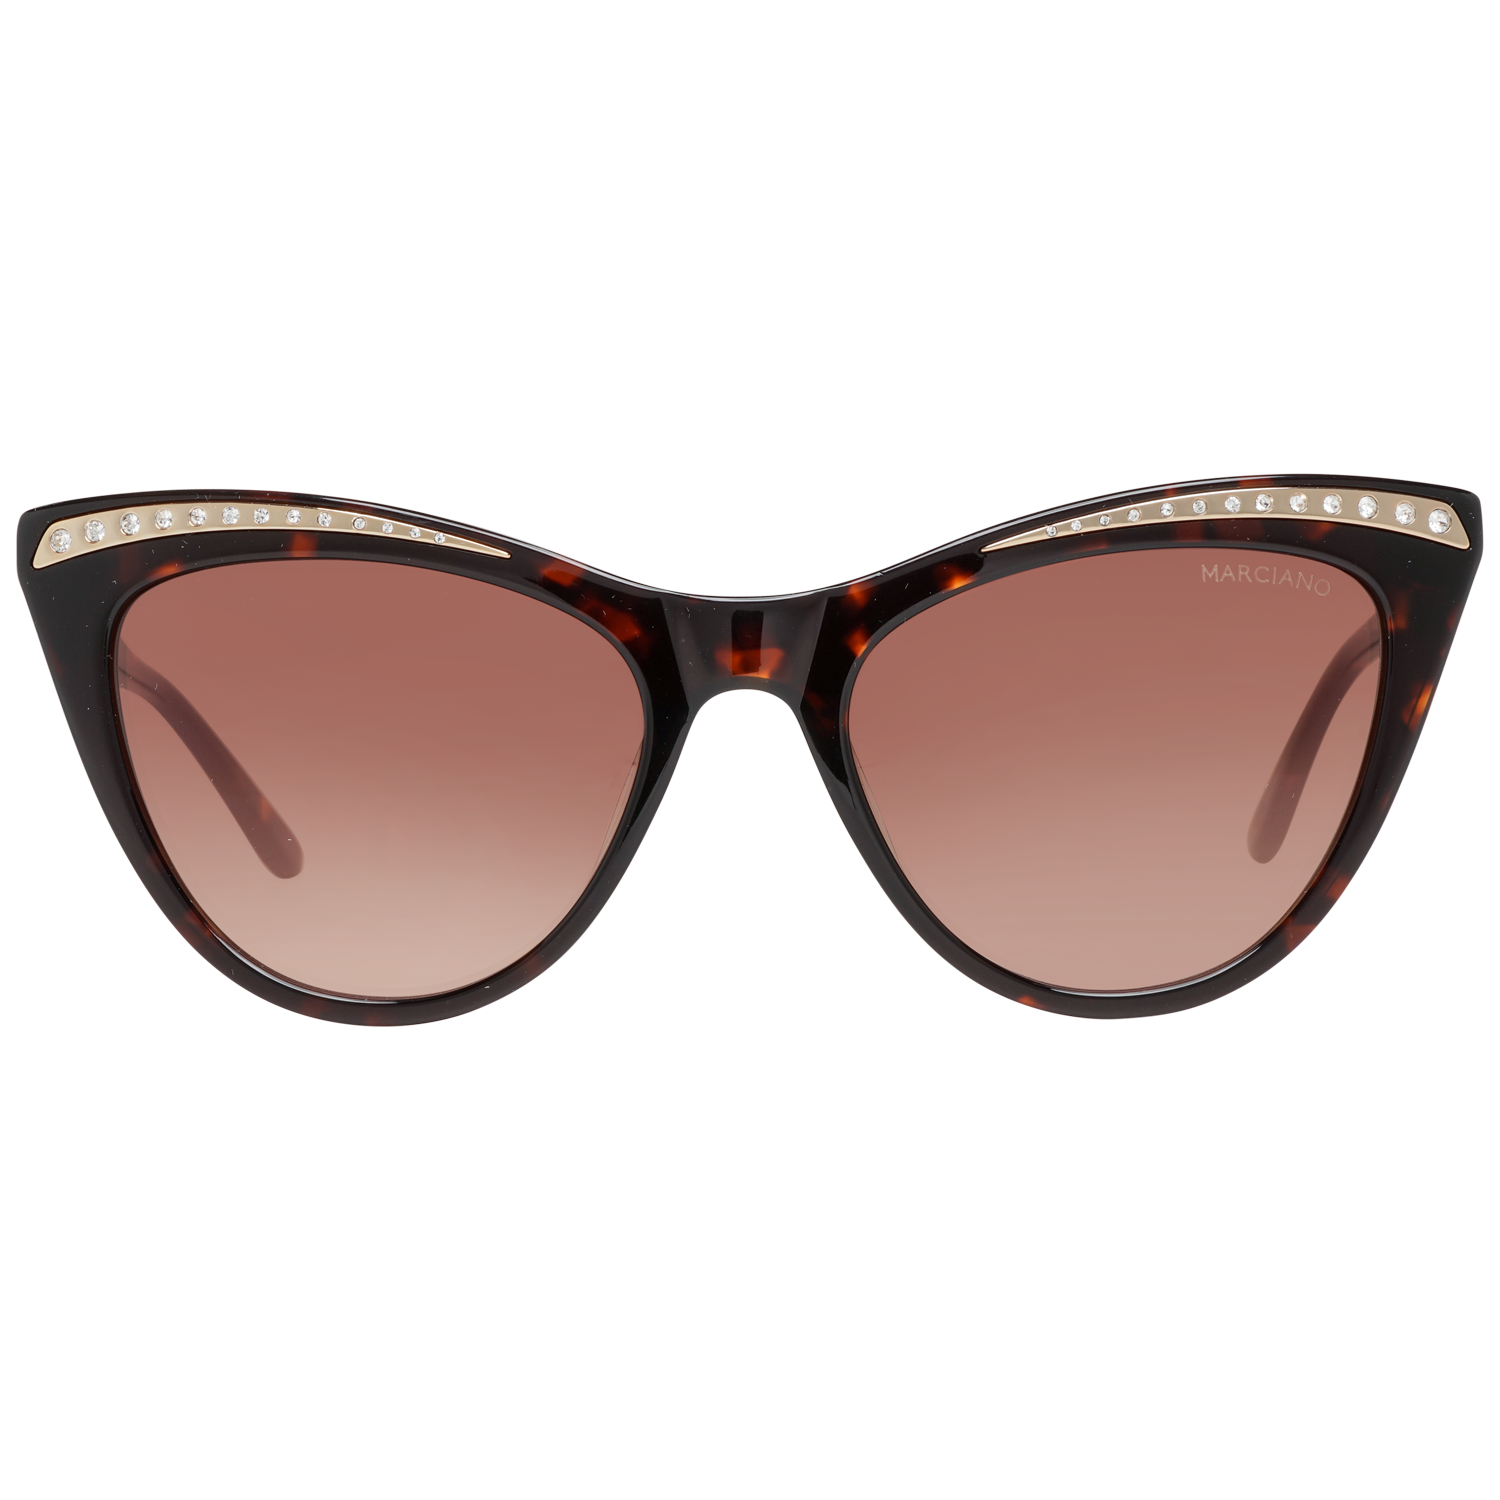 Guess by Marciano Sunglasses GM0793 52F 53 Women Brown